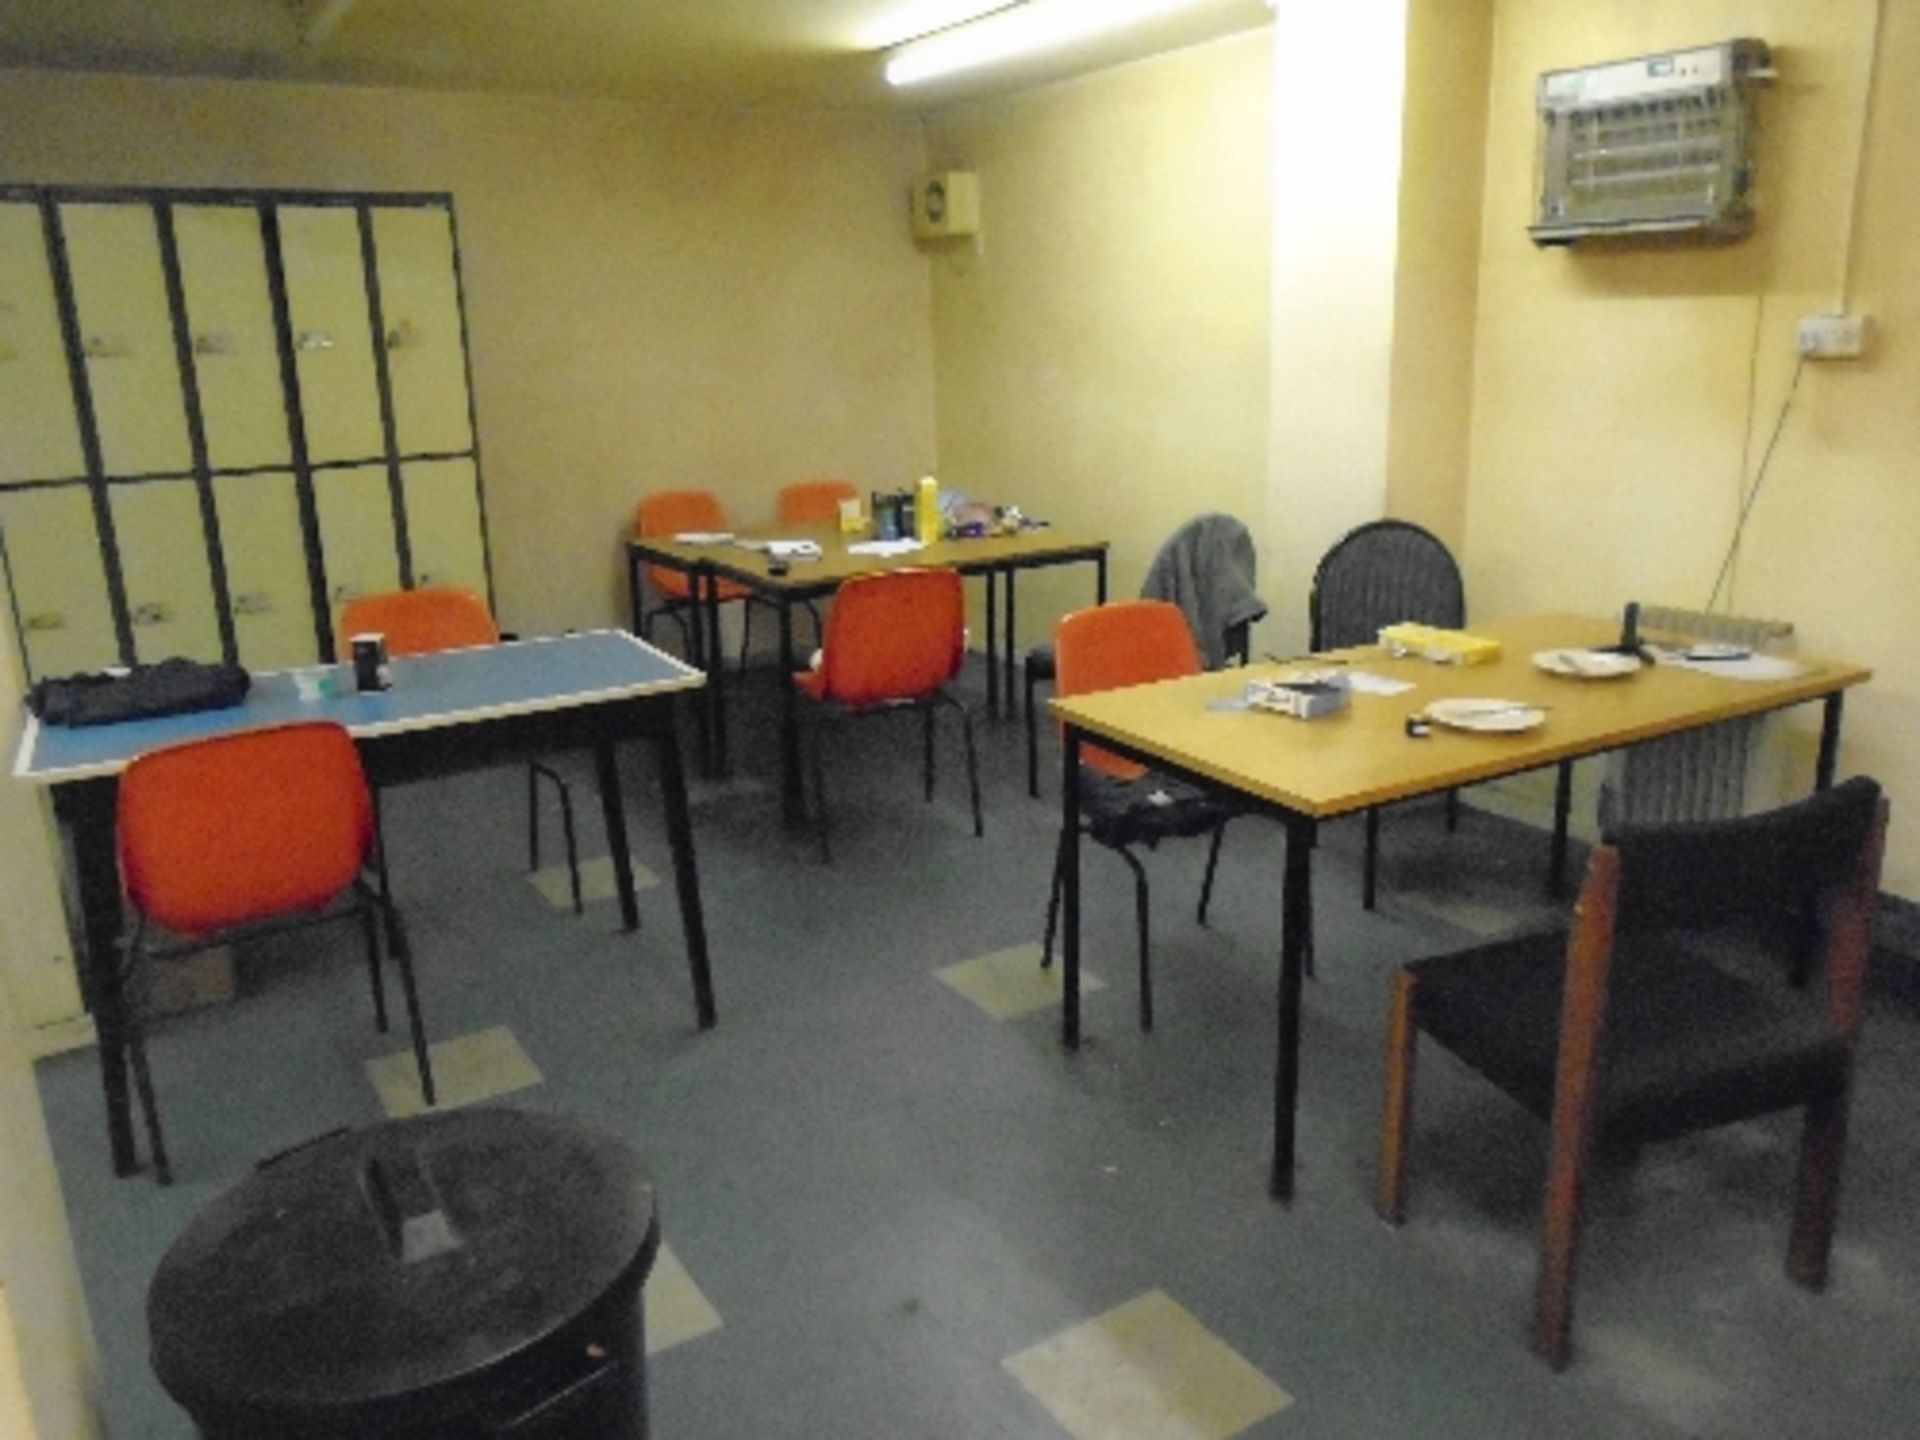 Remaining contents to canteen area - tables, chairs, vacuum cleaners, heaters, mugs,